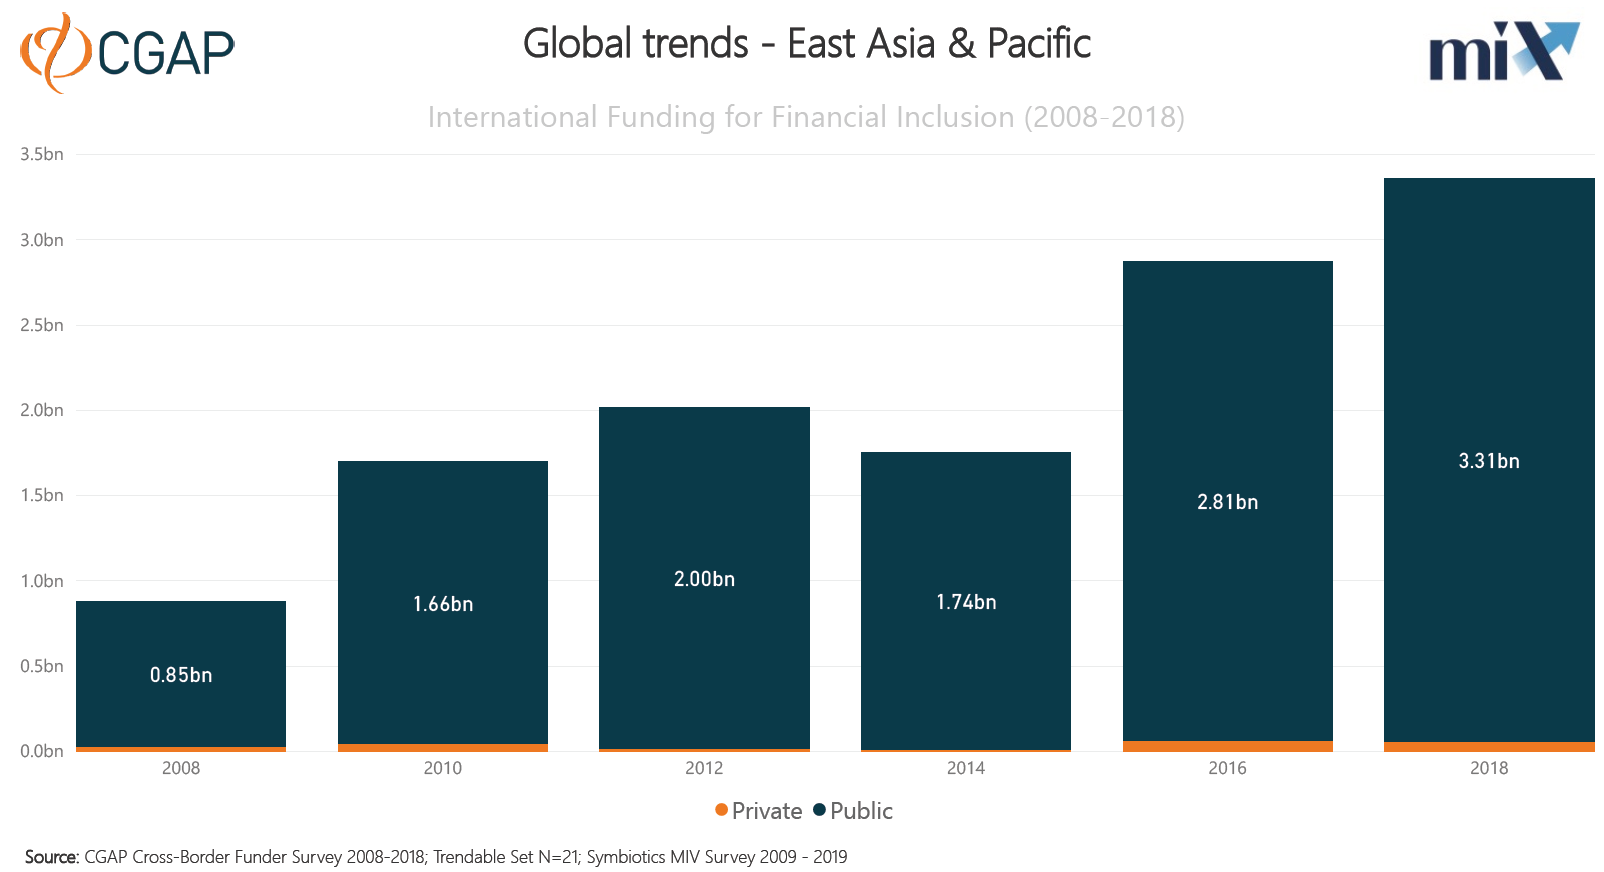 International Funding Trends for Financial Inclusion, East Asia and the Pacific (2009 - 2018)